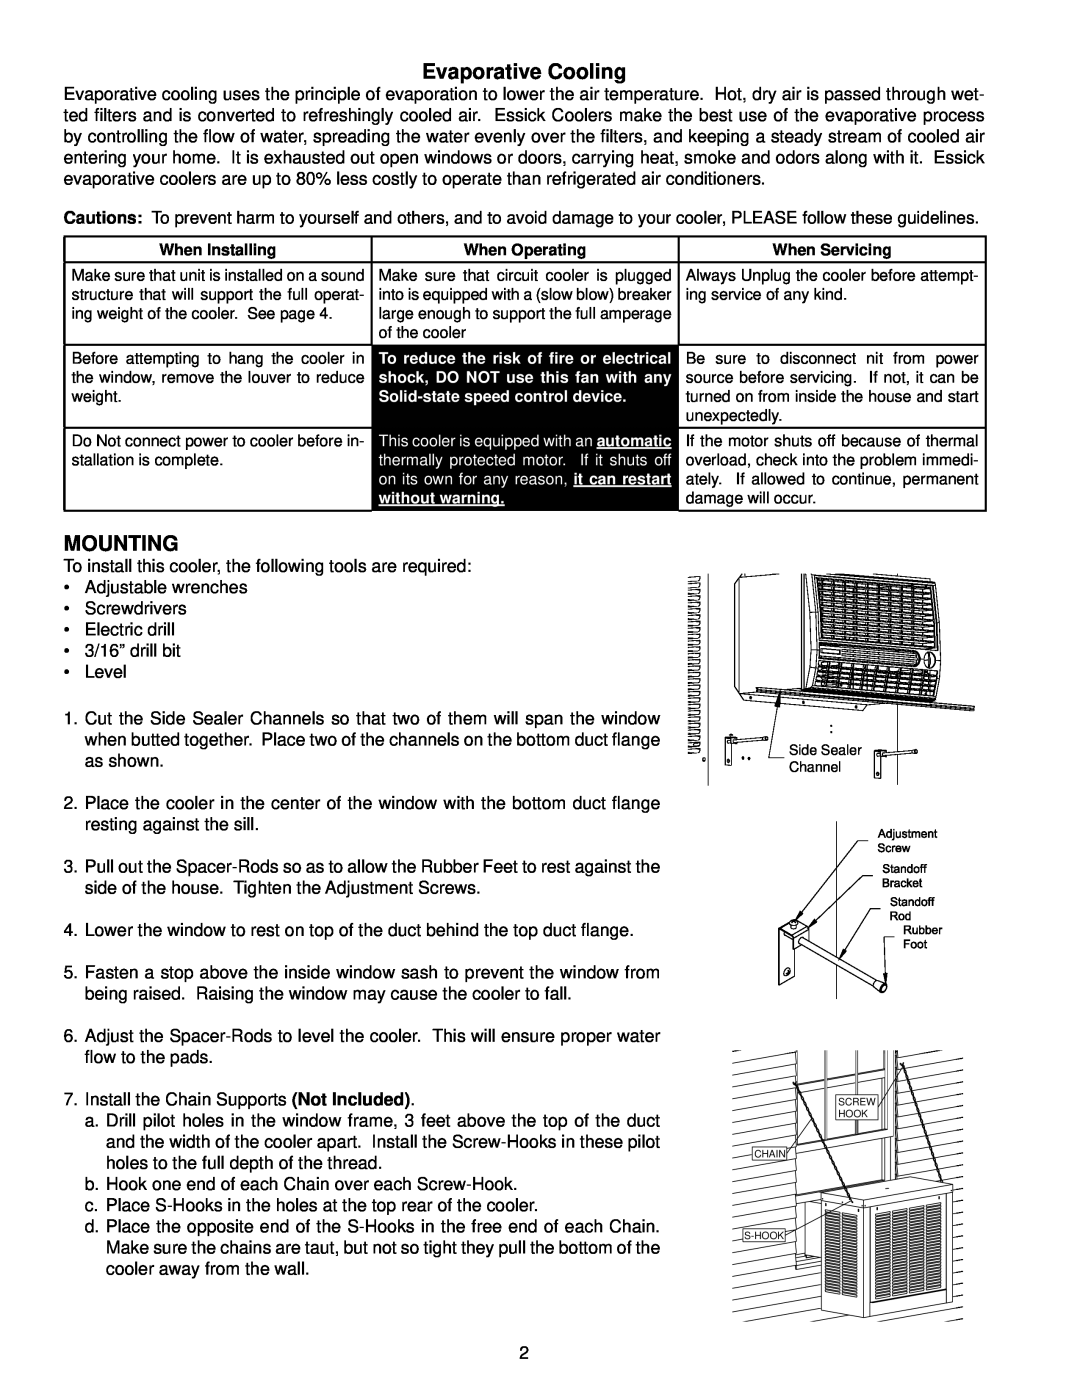 Essick Air N30W instruction manual Evaporative Cooling, Mounting 